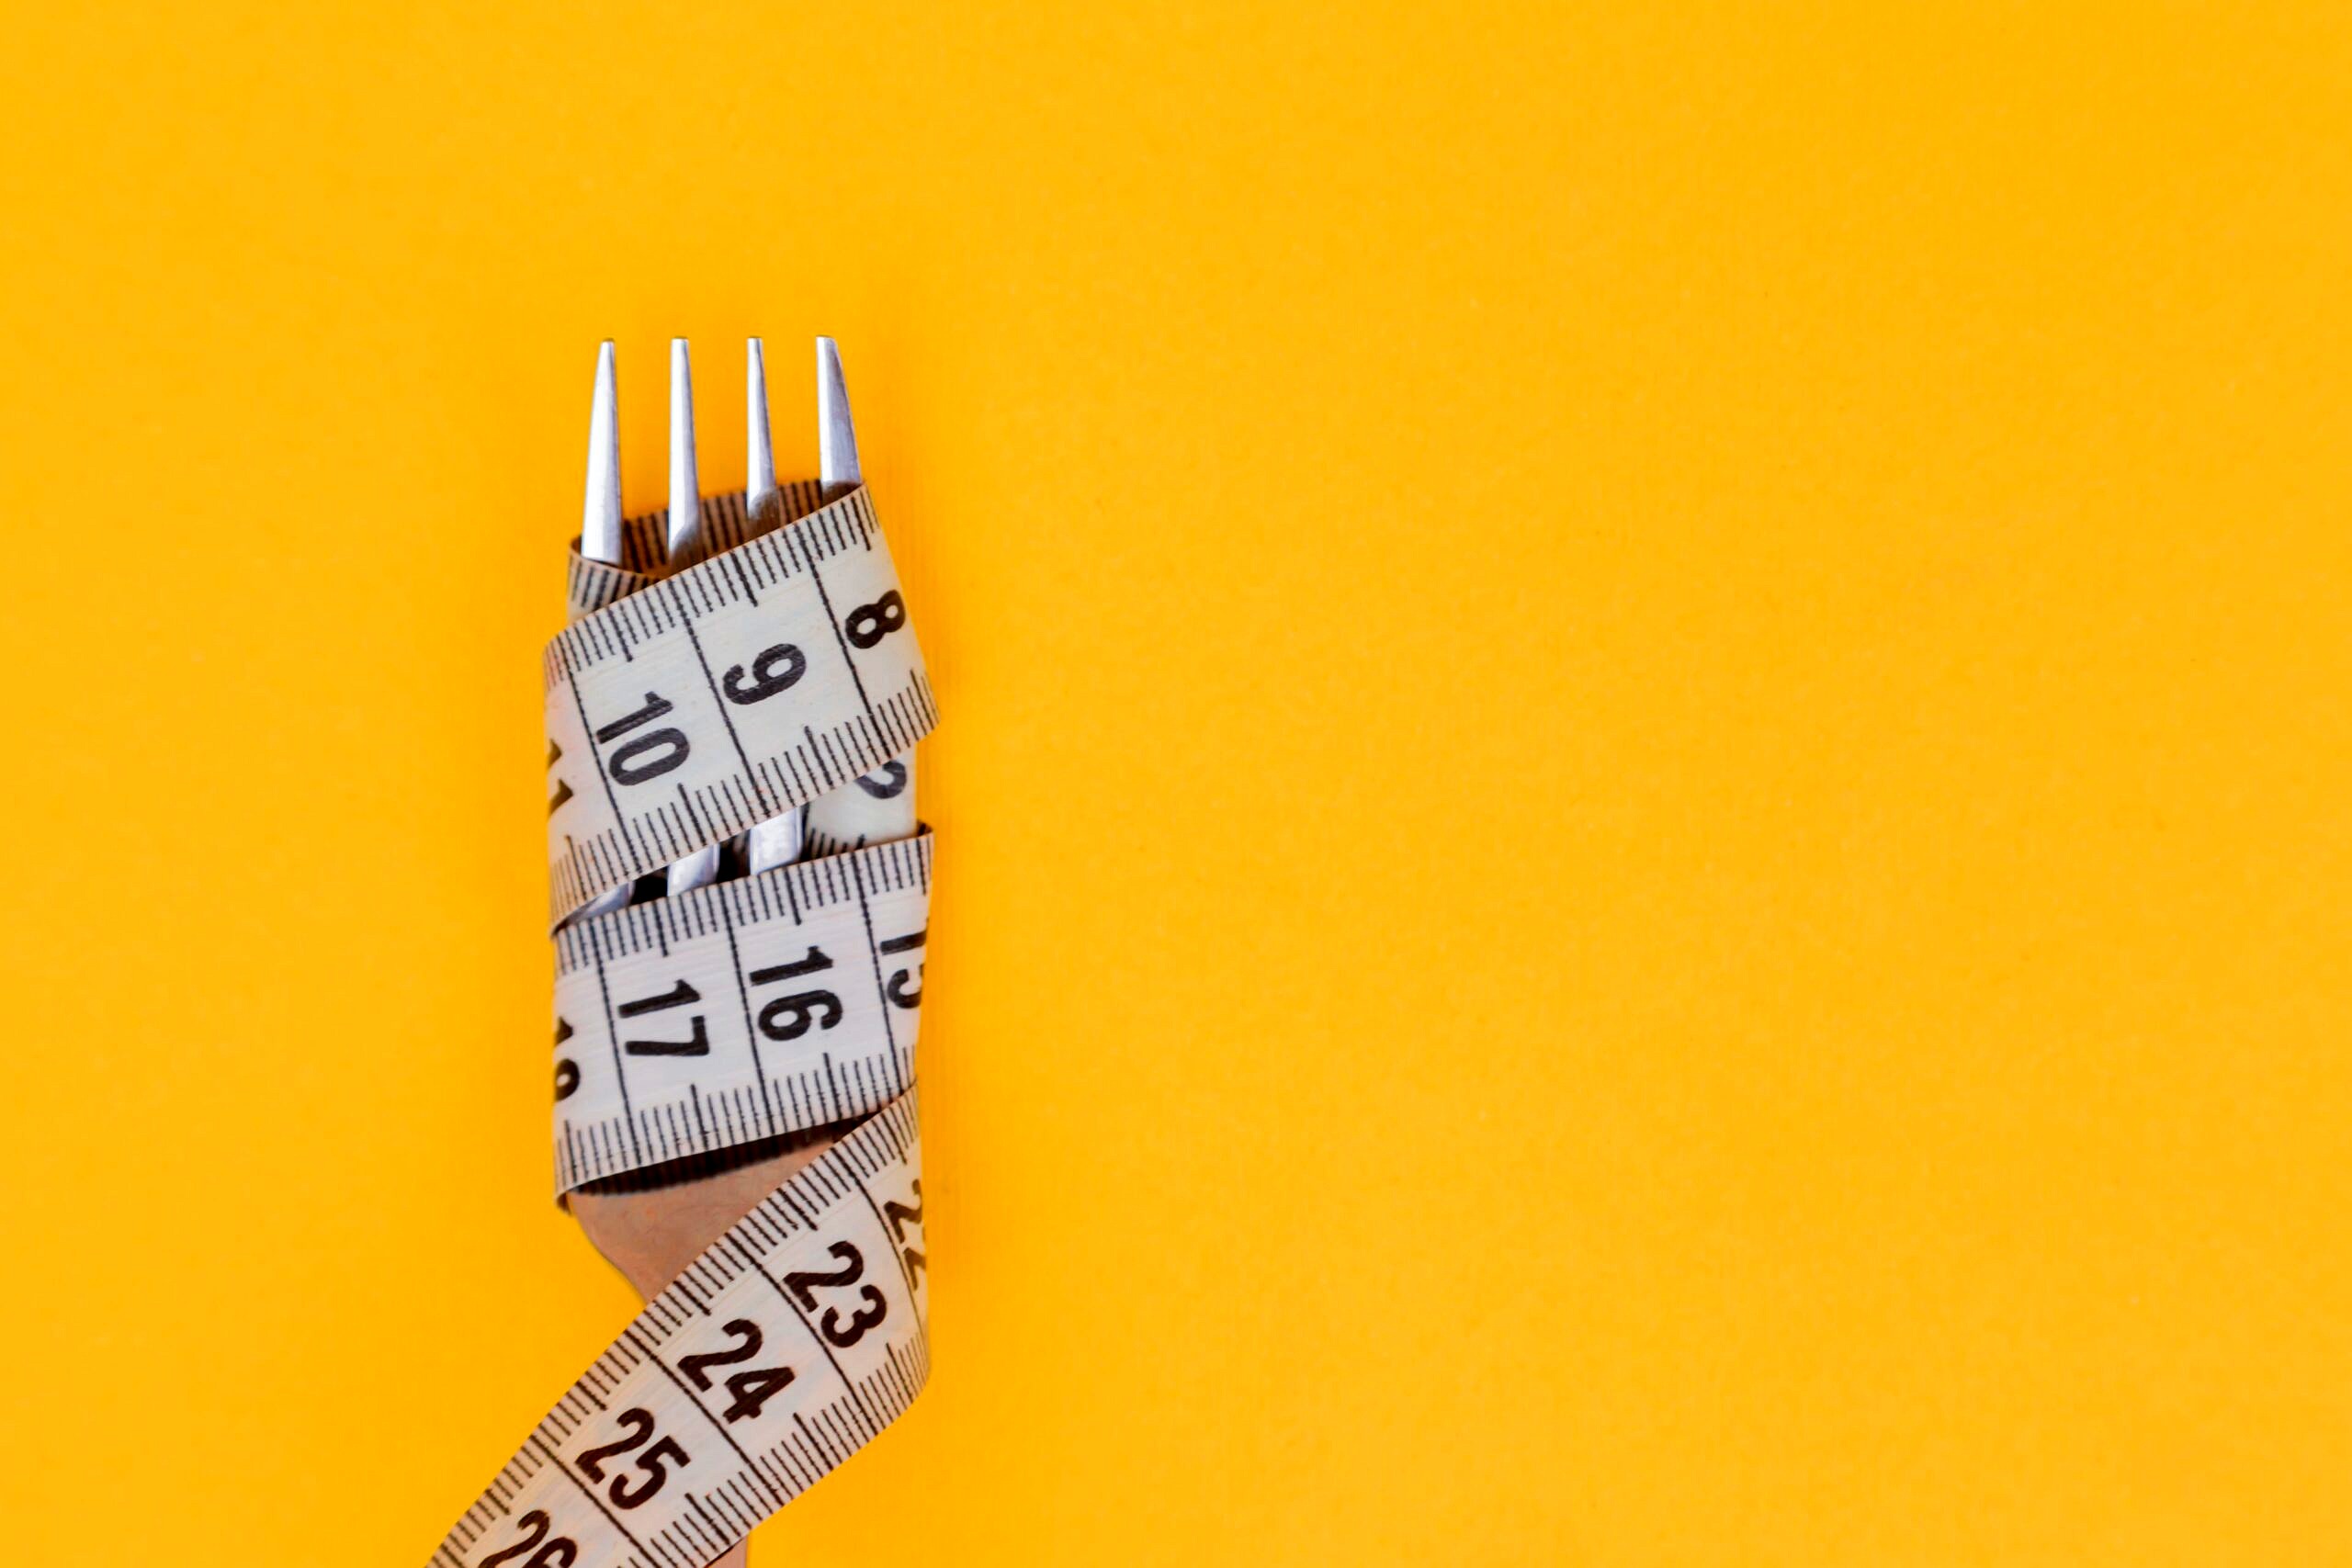 Fork and tape measure against a yellow background.